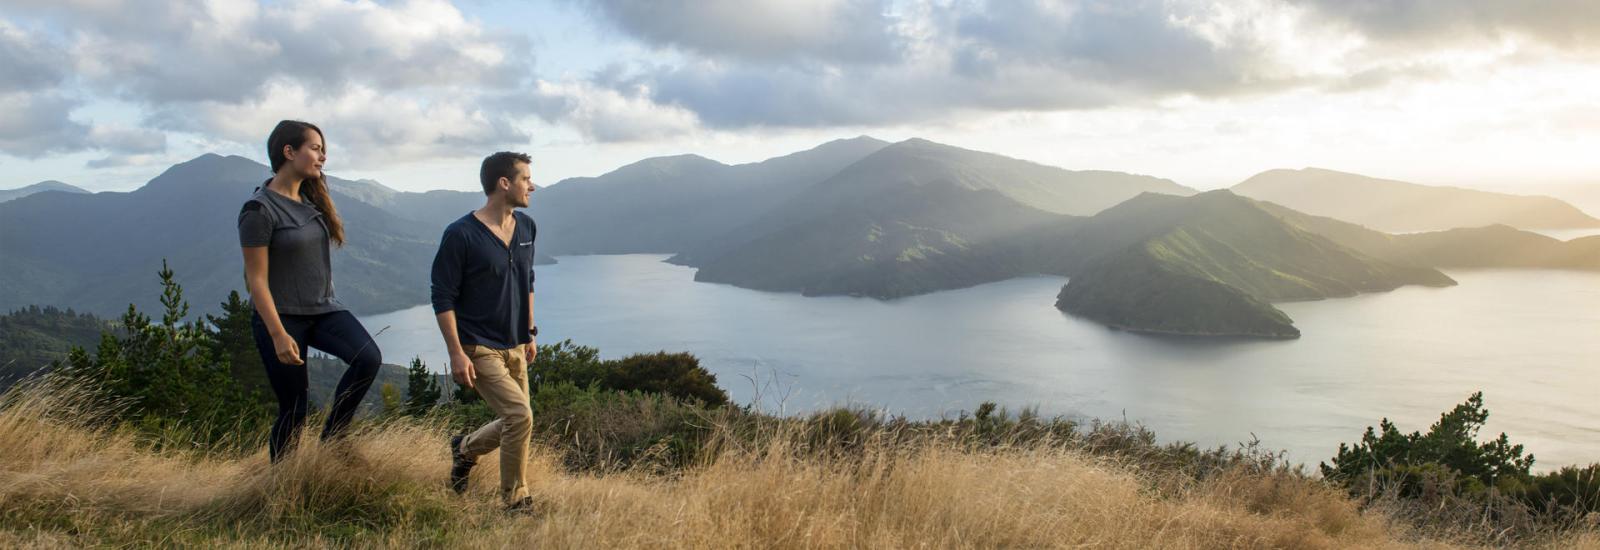 Views over the Marlborough Sounds Queen Charlotte Track.